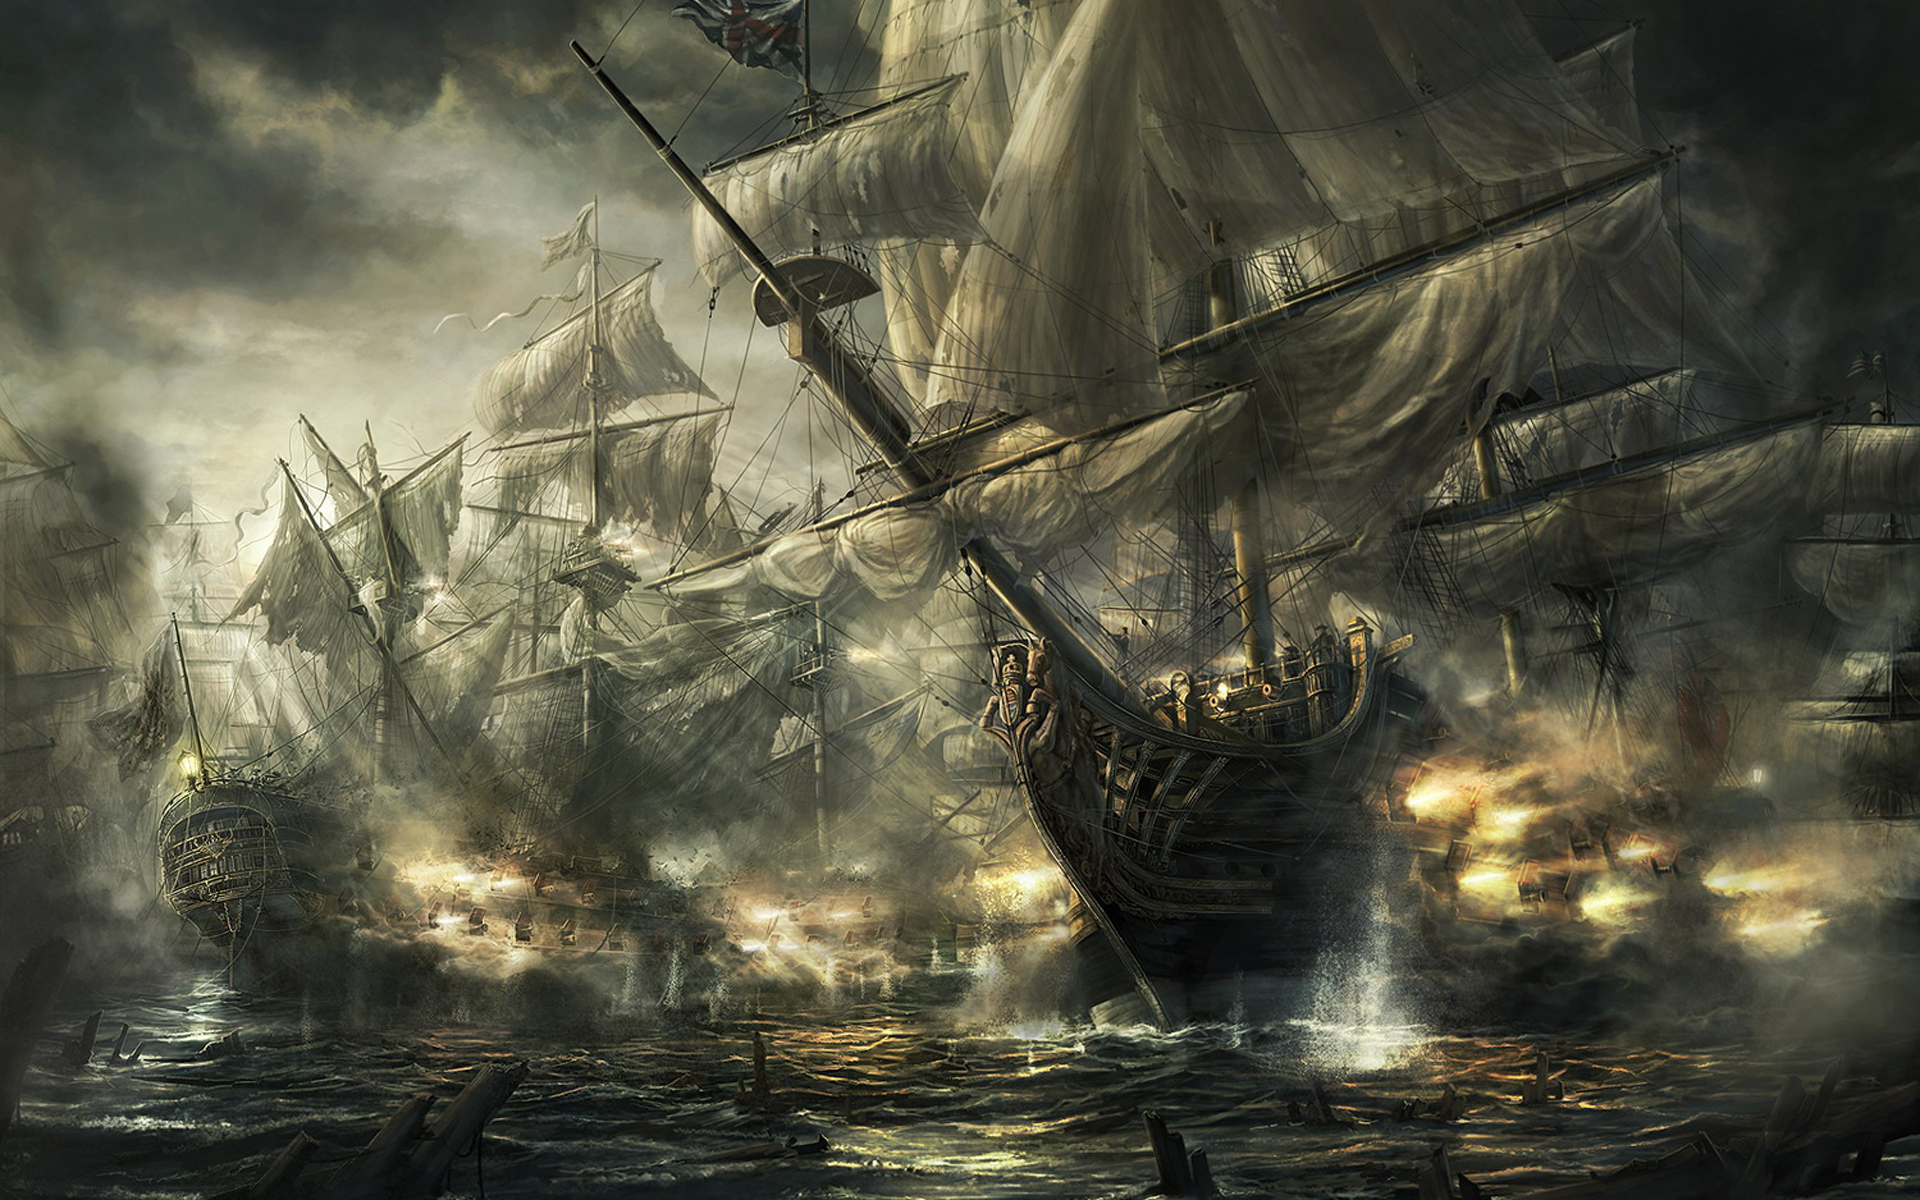 Pirate Battle Wallpapers Free Pirate Battle HD Wallpapers Pirate